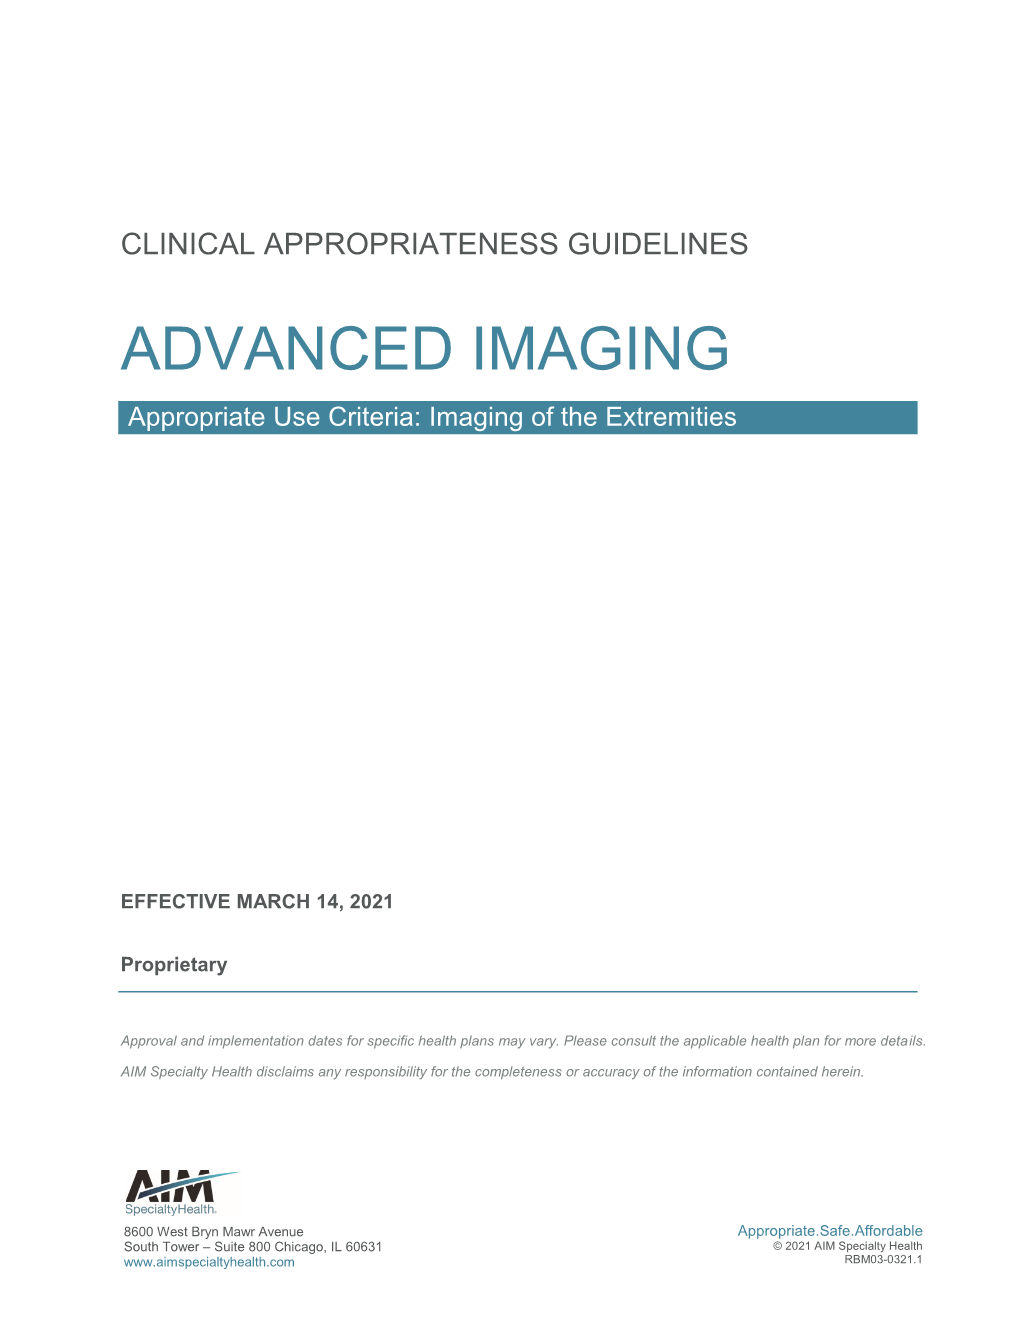 ADVANCED IMAGING Appropriate Use Criteria: Imaging of the Extremities